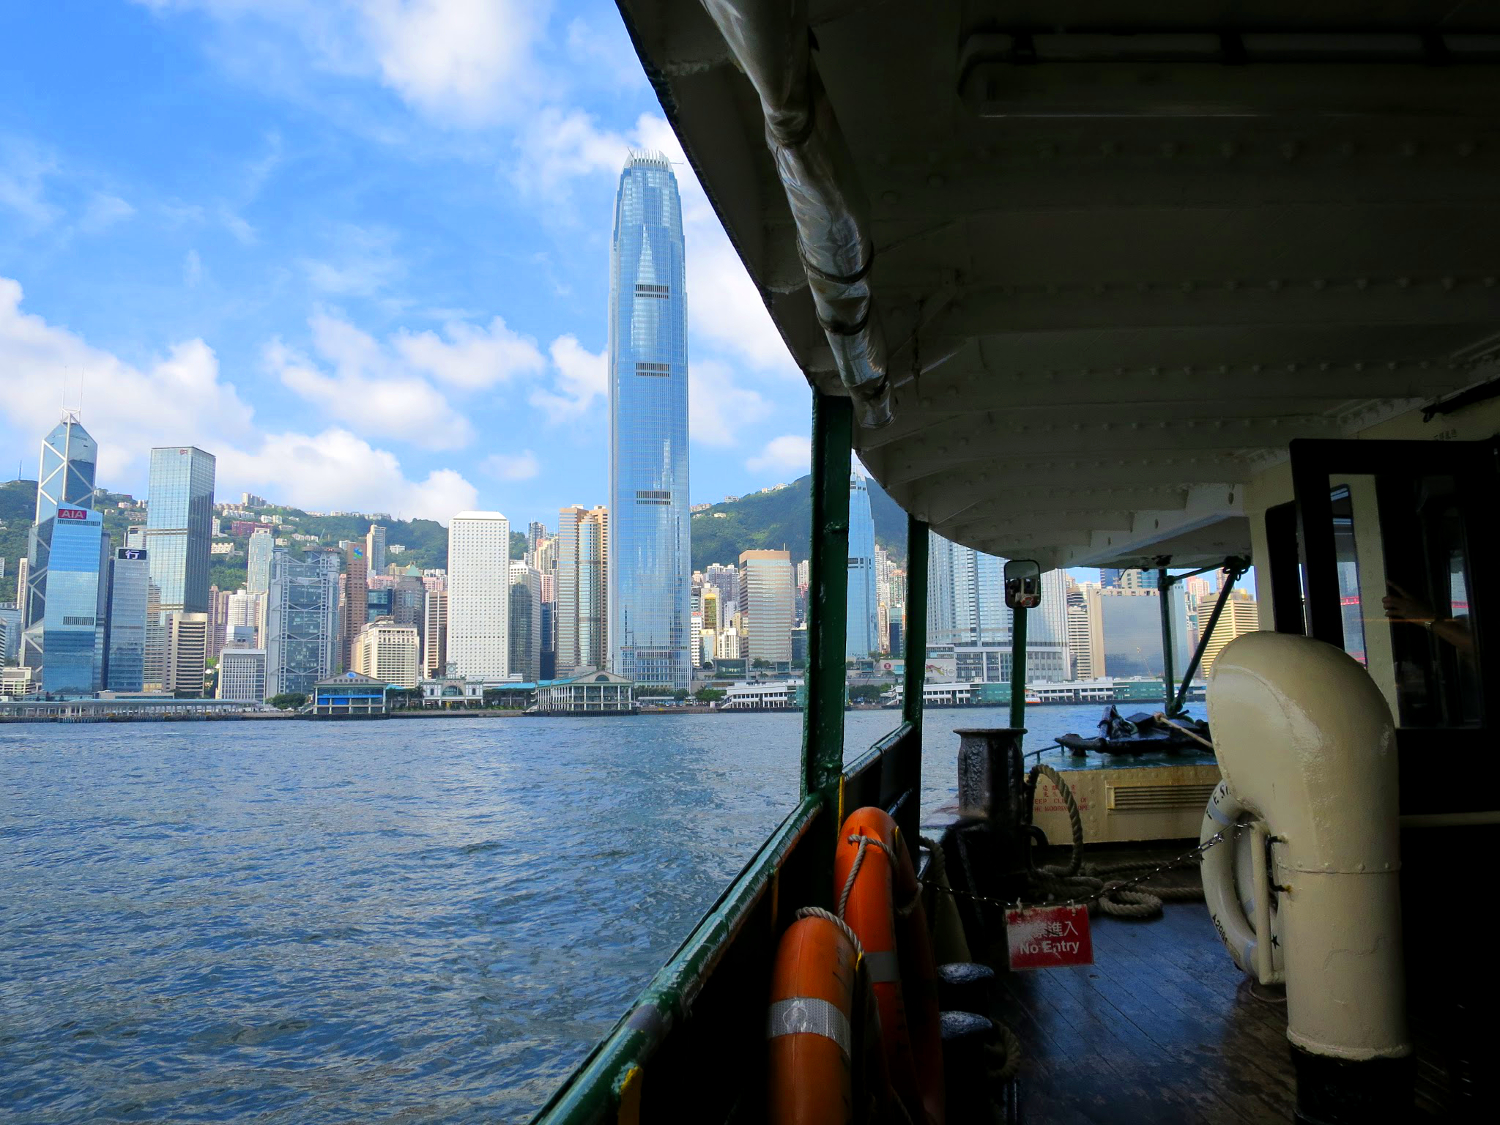 Skyscrapers tower above during a Star Ferry ride. Image by Megan Eaves / londoninfopage